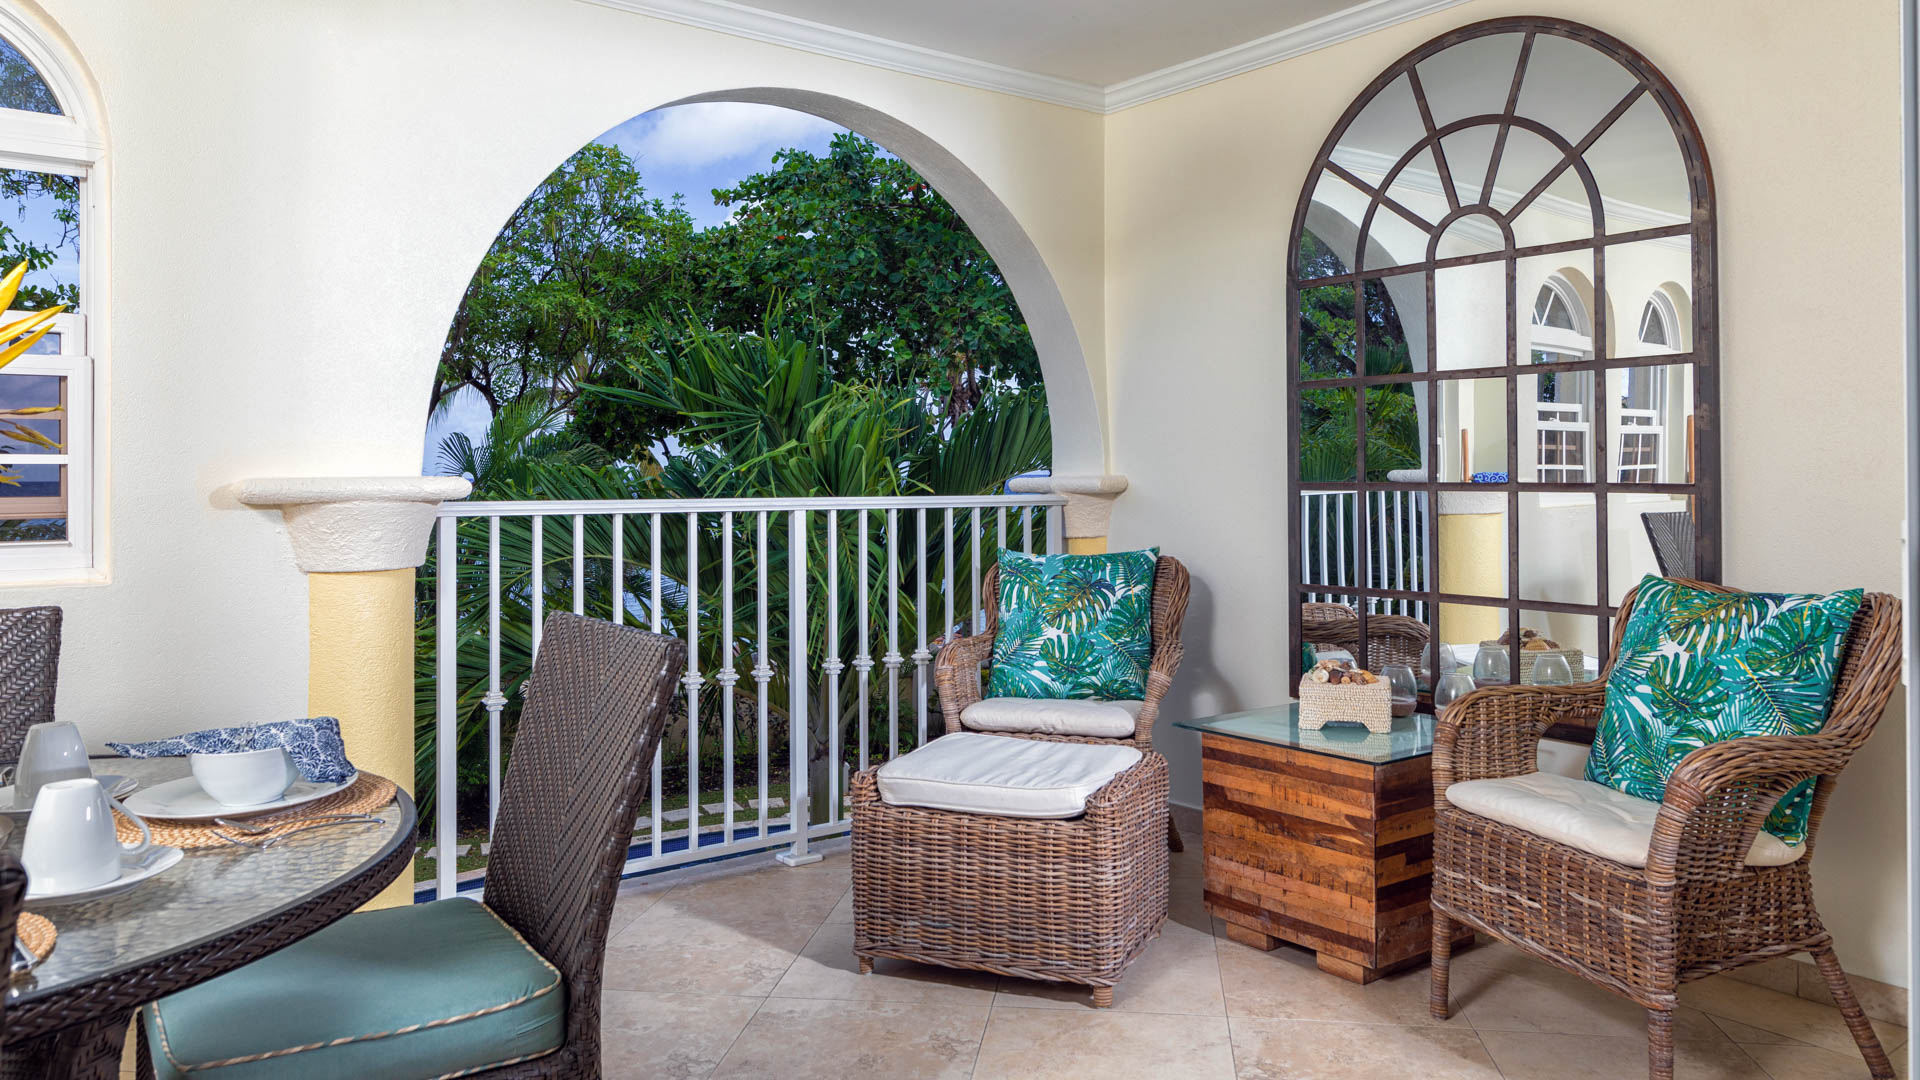 Property Image 2 - Beachside Barbados Condo Spanning Two Floors with Shared Pool